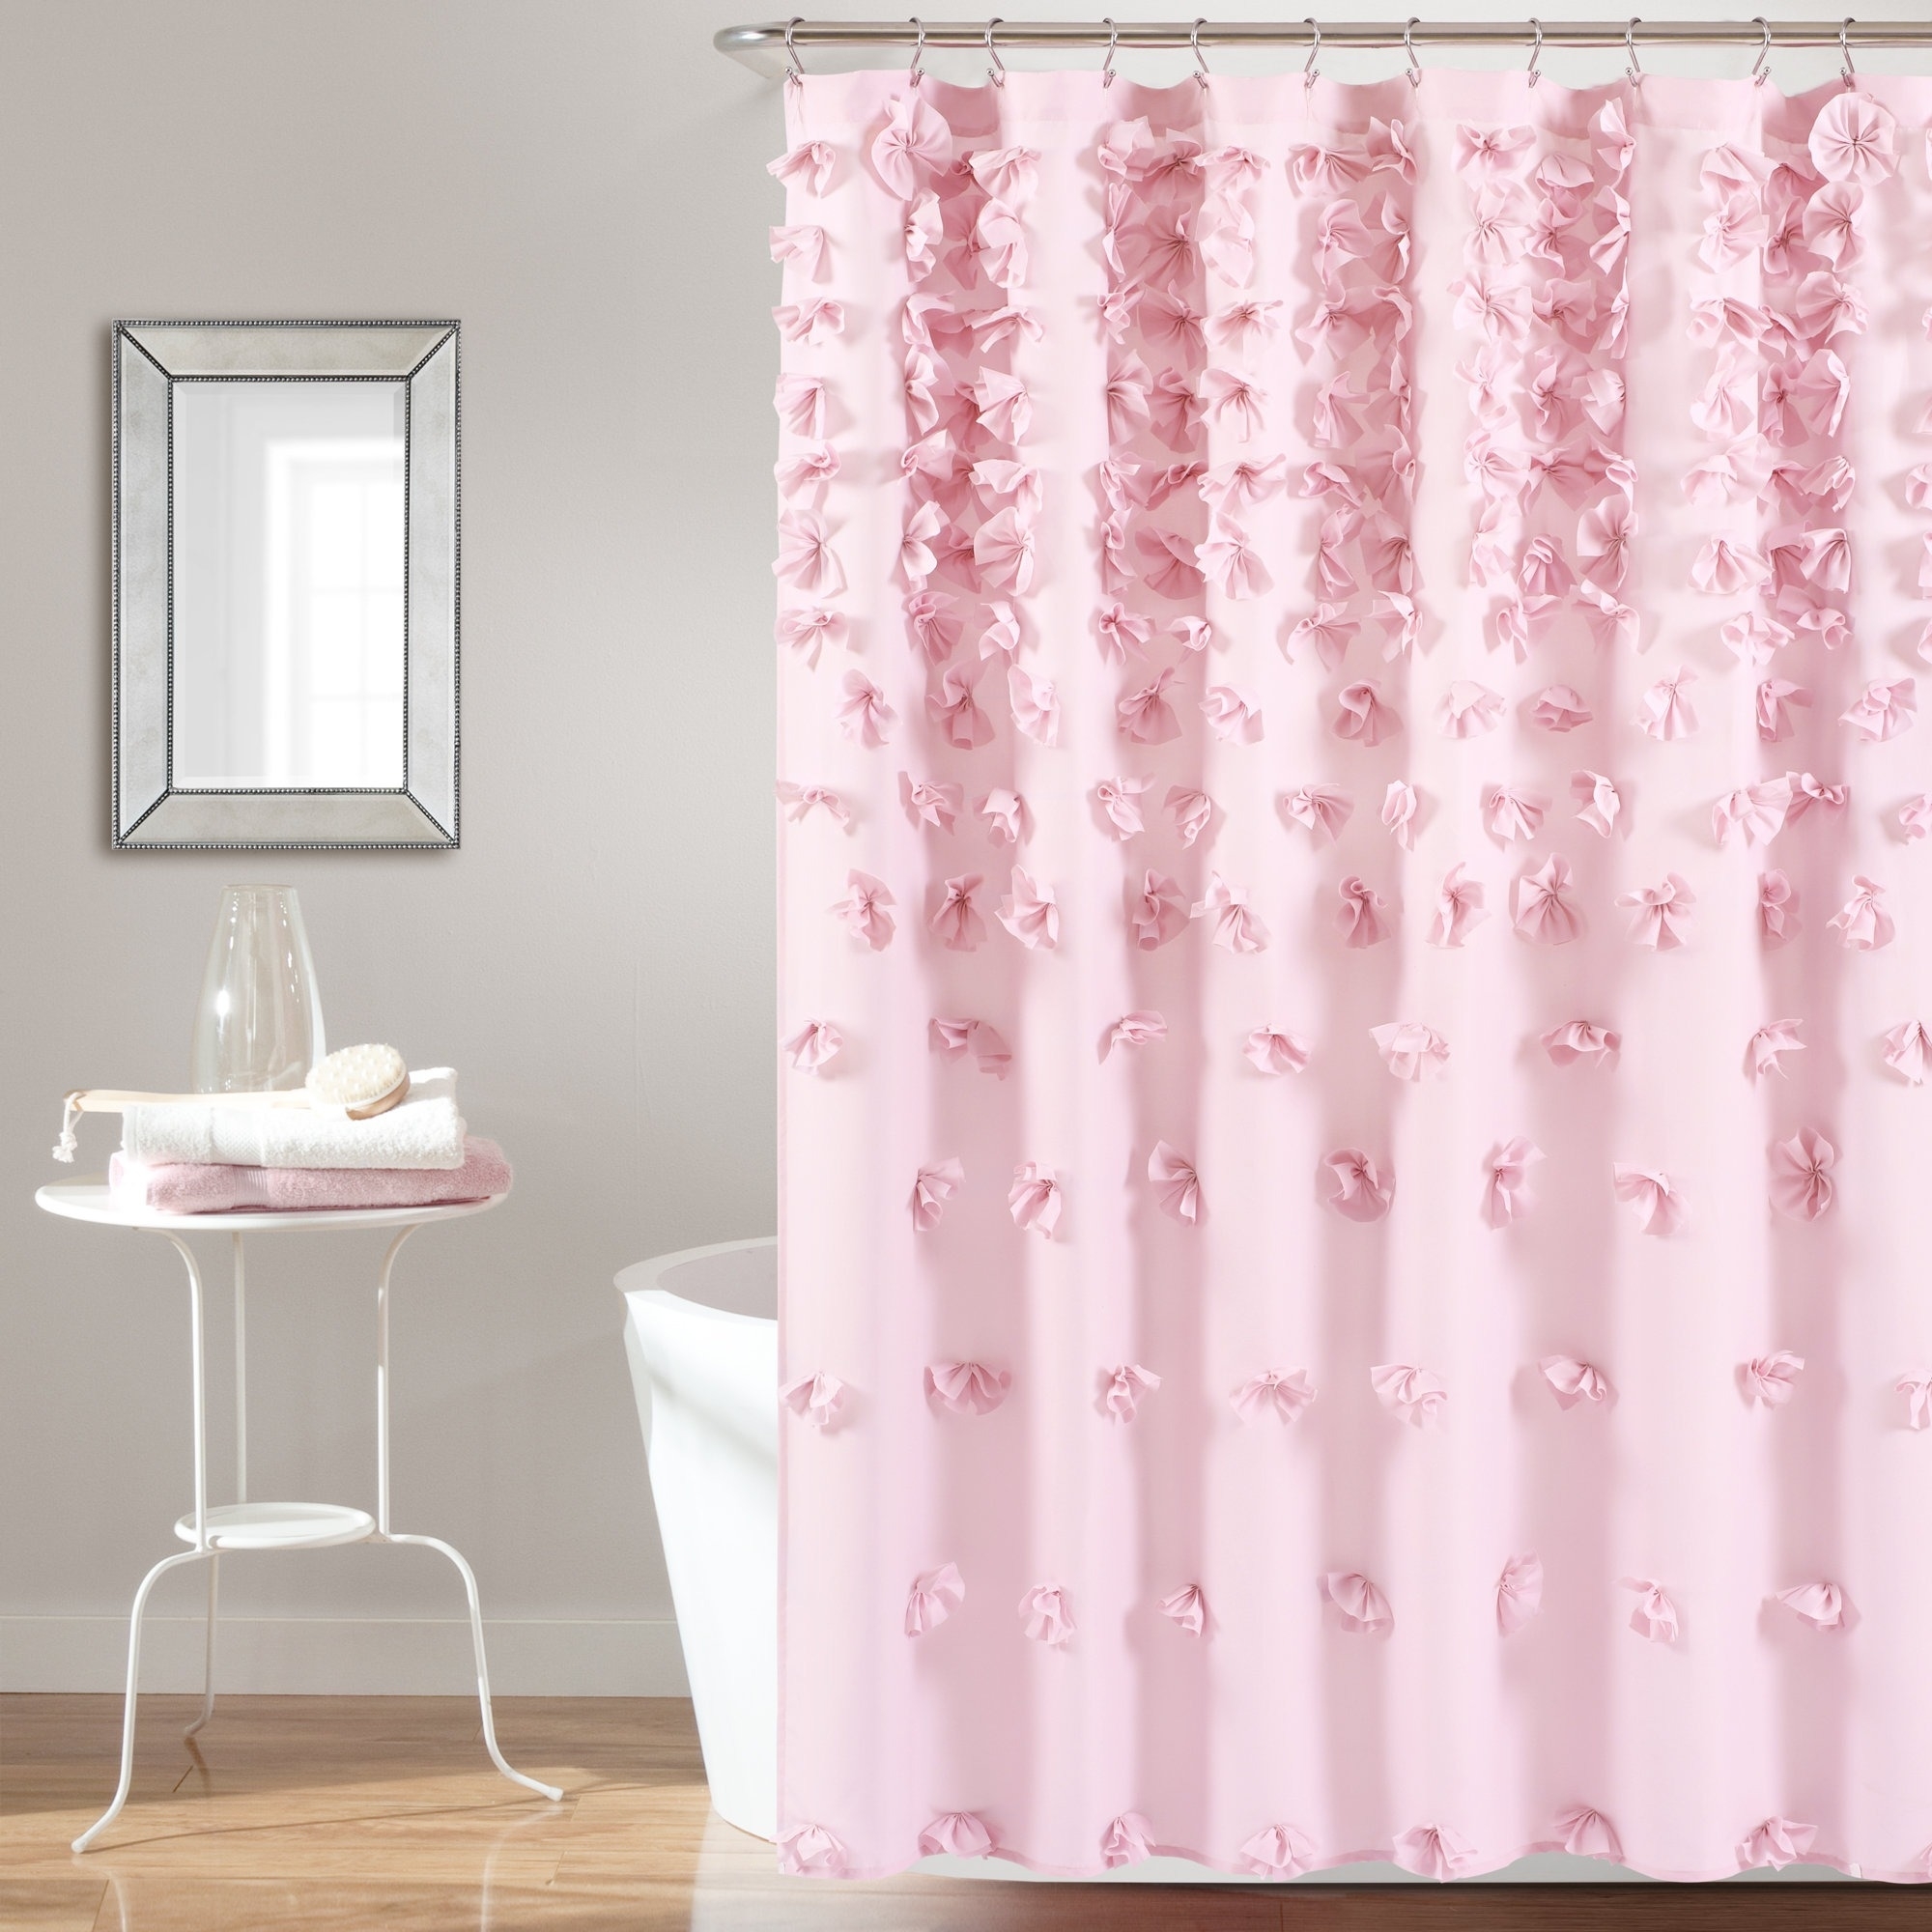 Pink shower curtain with 3D floral pattern